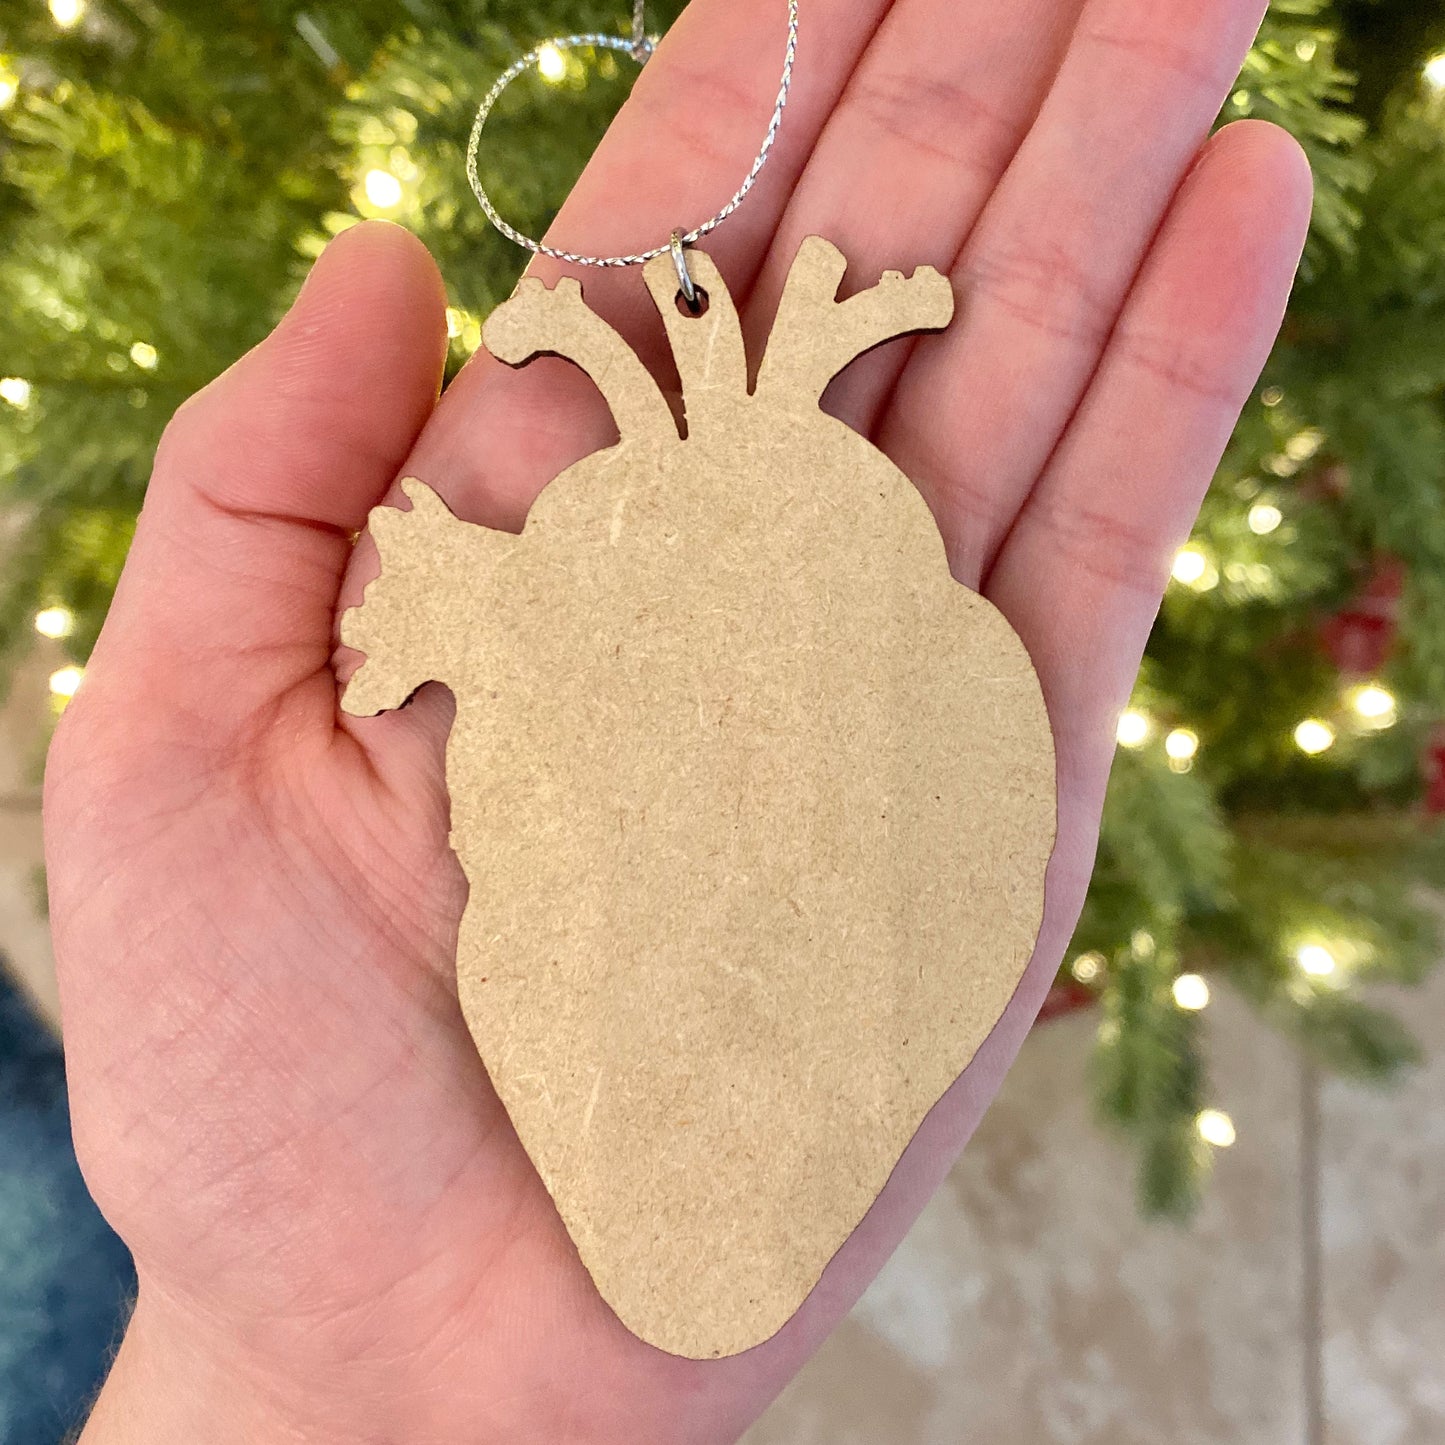 Painted Anatomical Heart Ornament